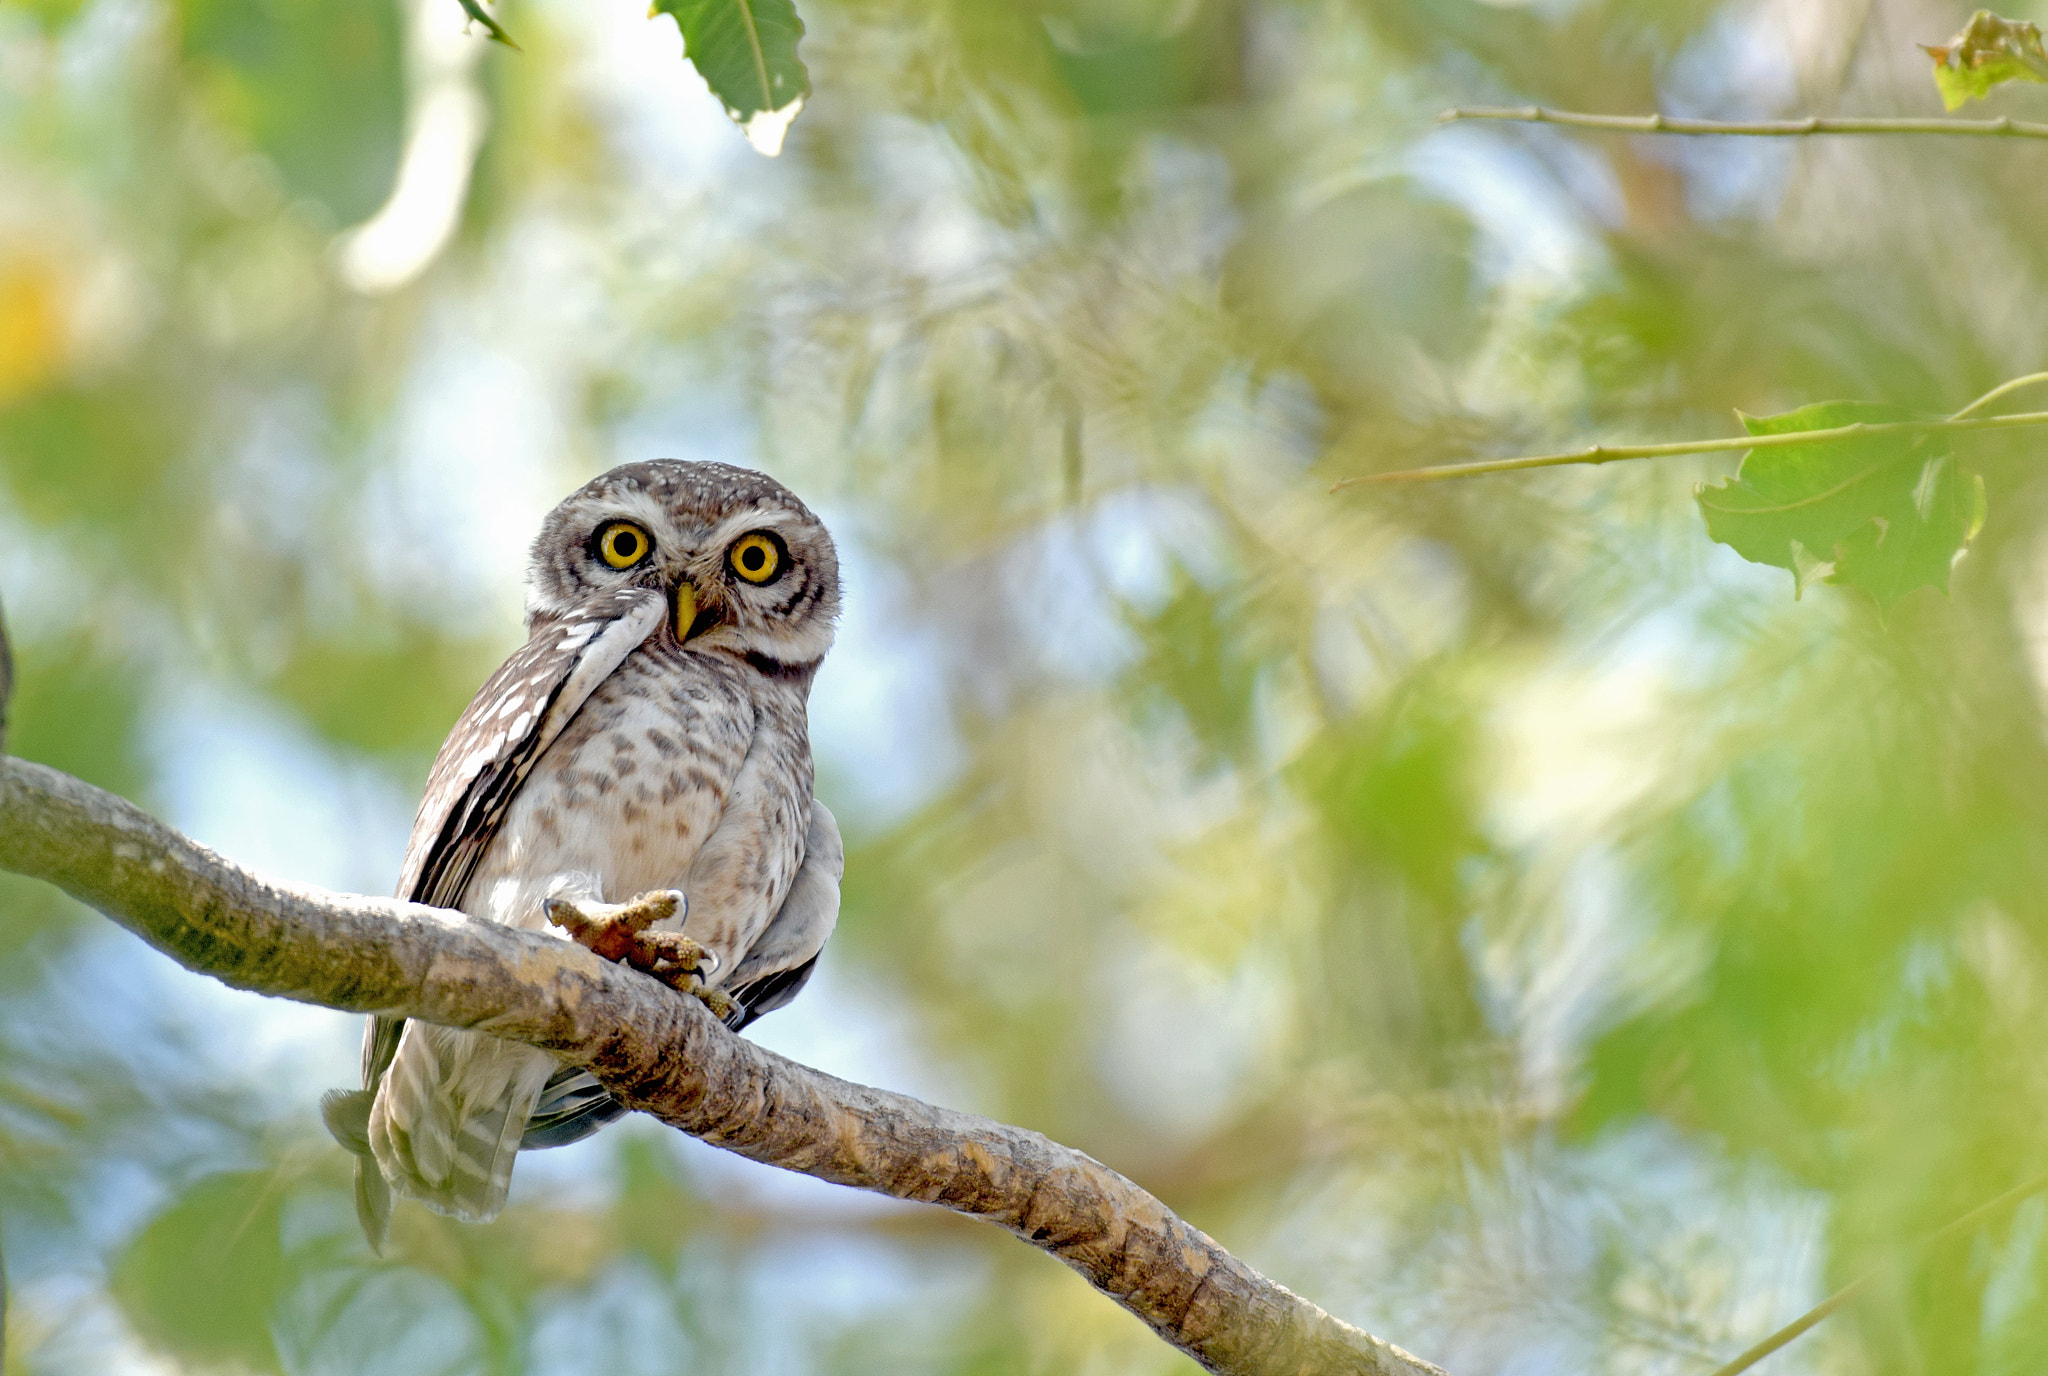 FSA-L2, EDG 65, 800mm F13 G sample photo. Spotted owlet photography